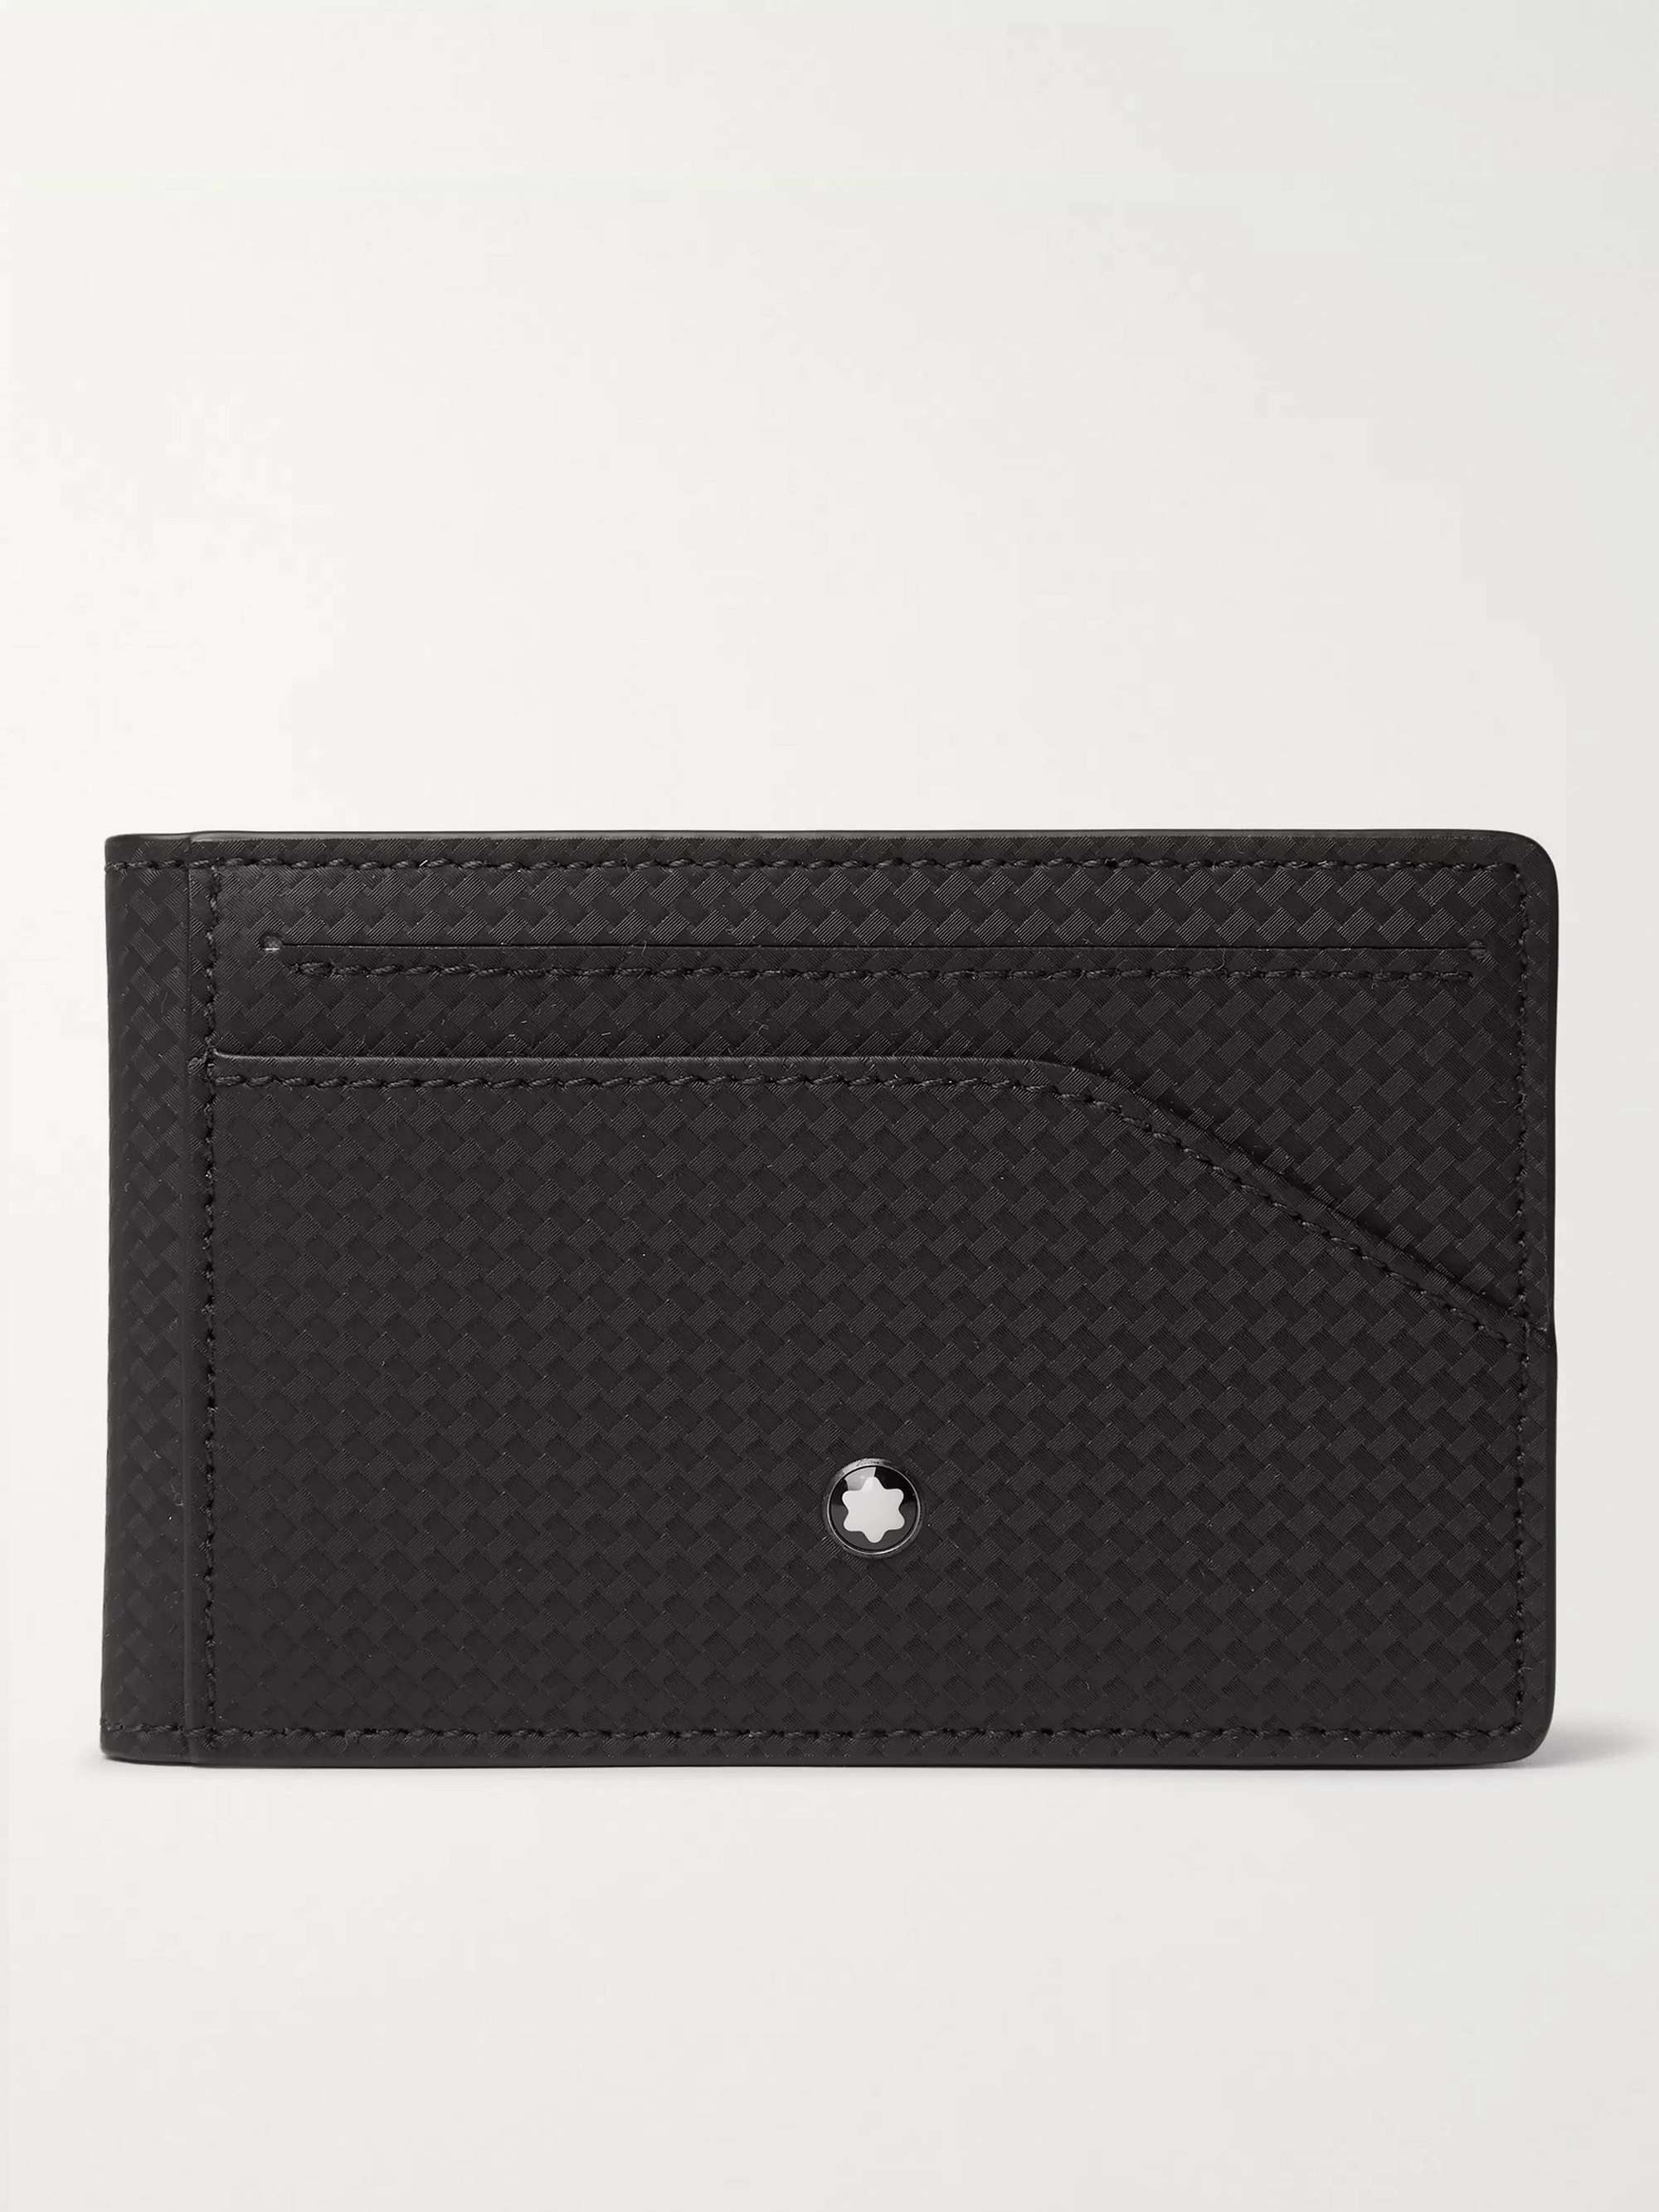 MONTBLANC Extreme 2.0 Textured-Leather Cardholder